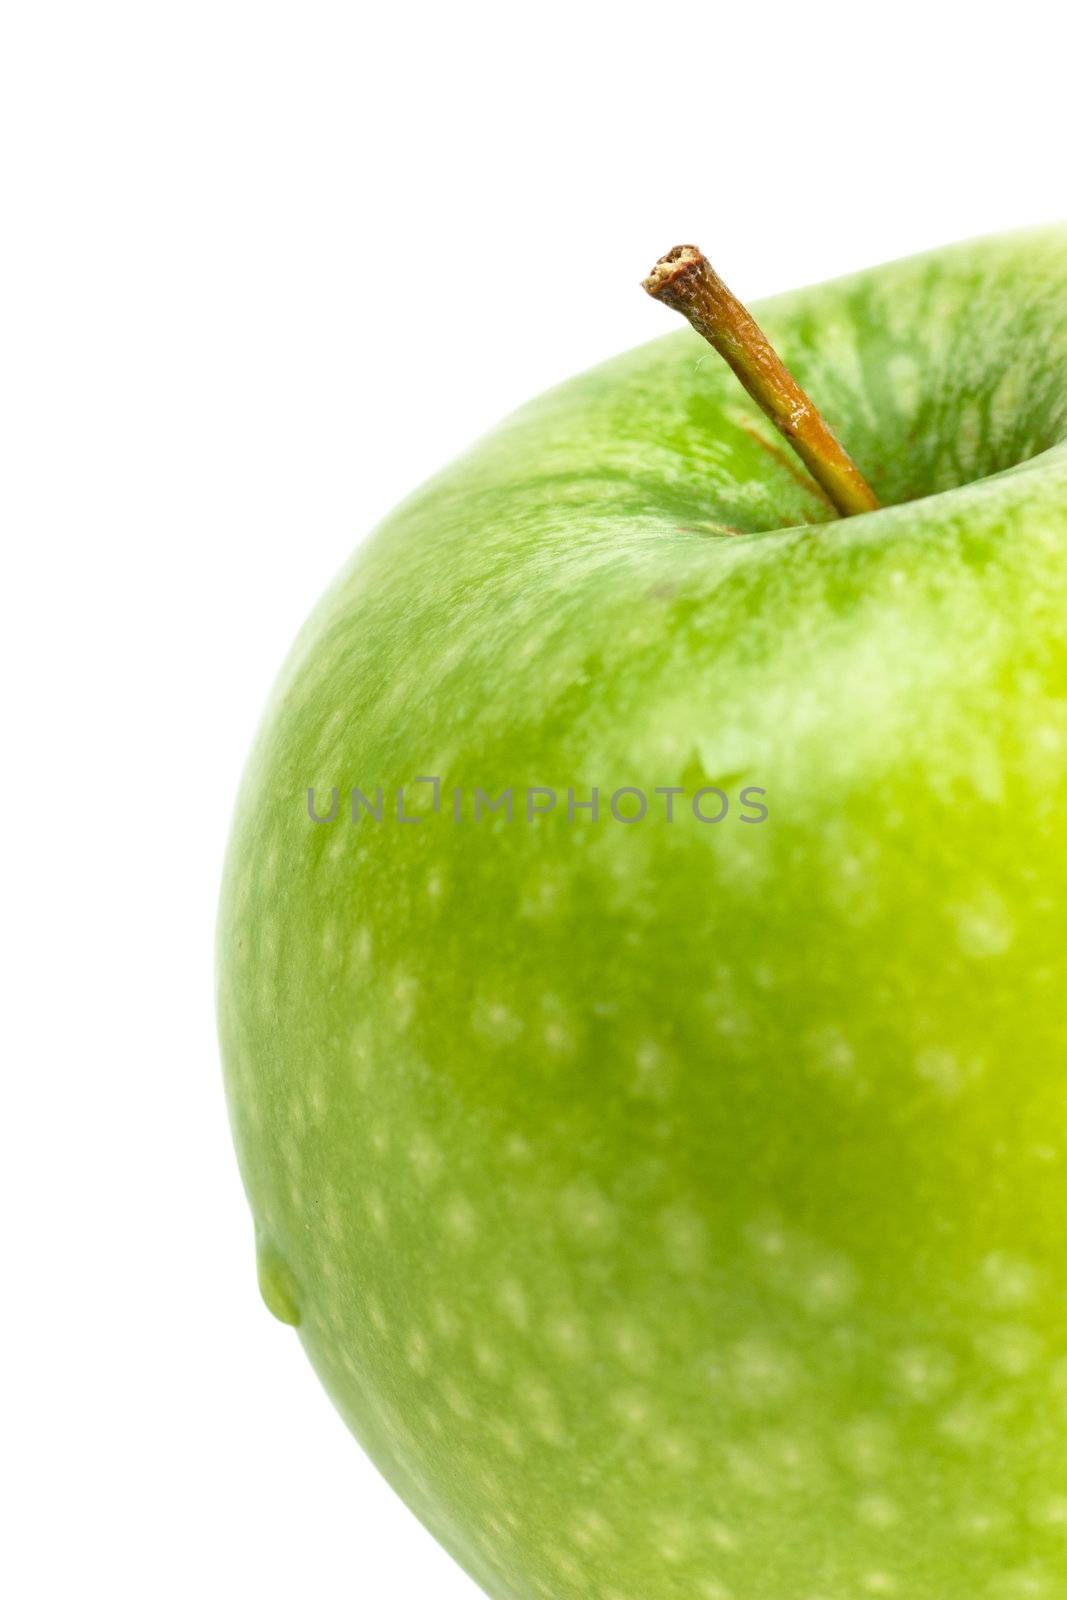 Big green apple isolated over white background